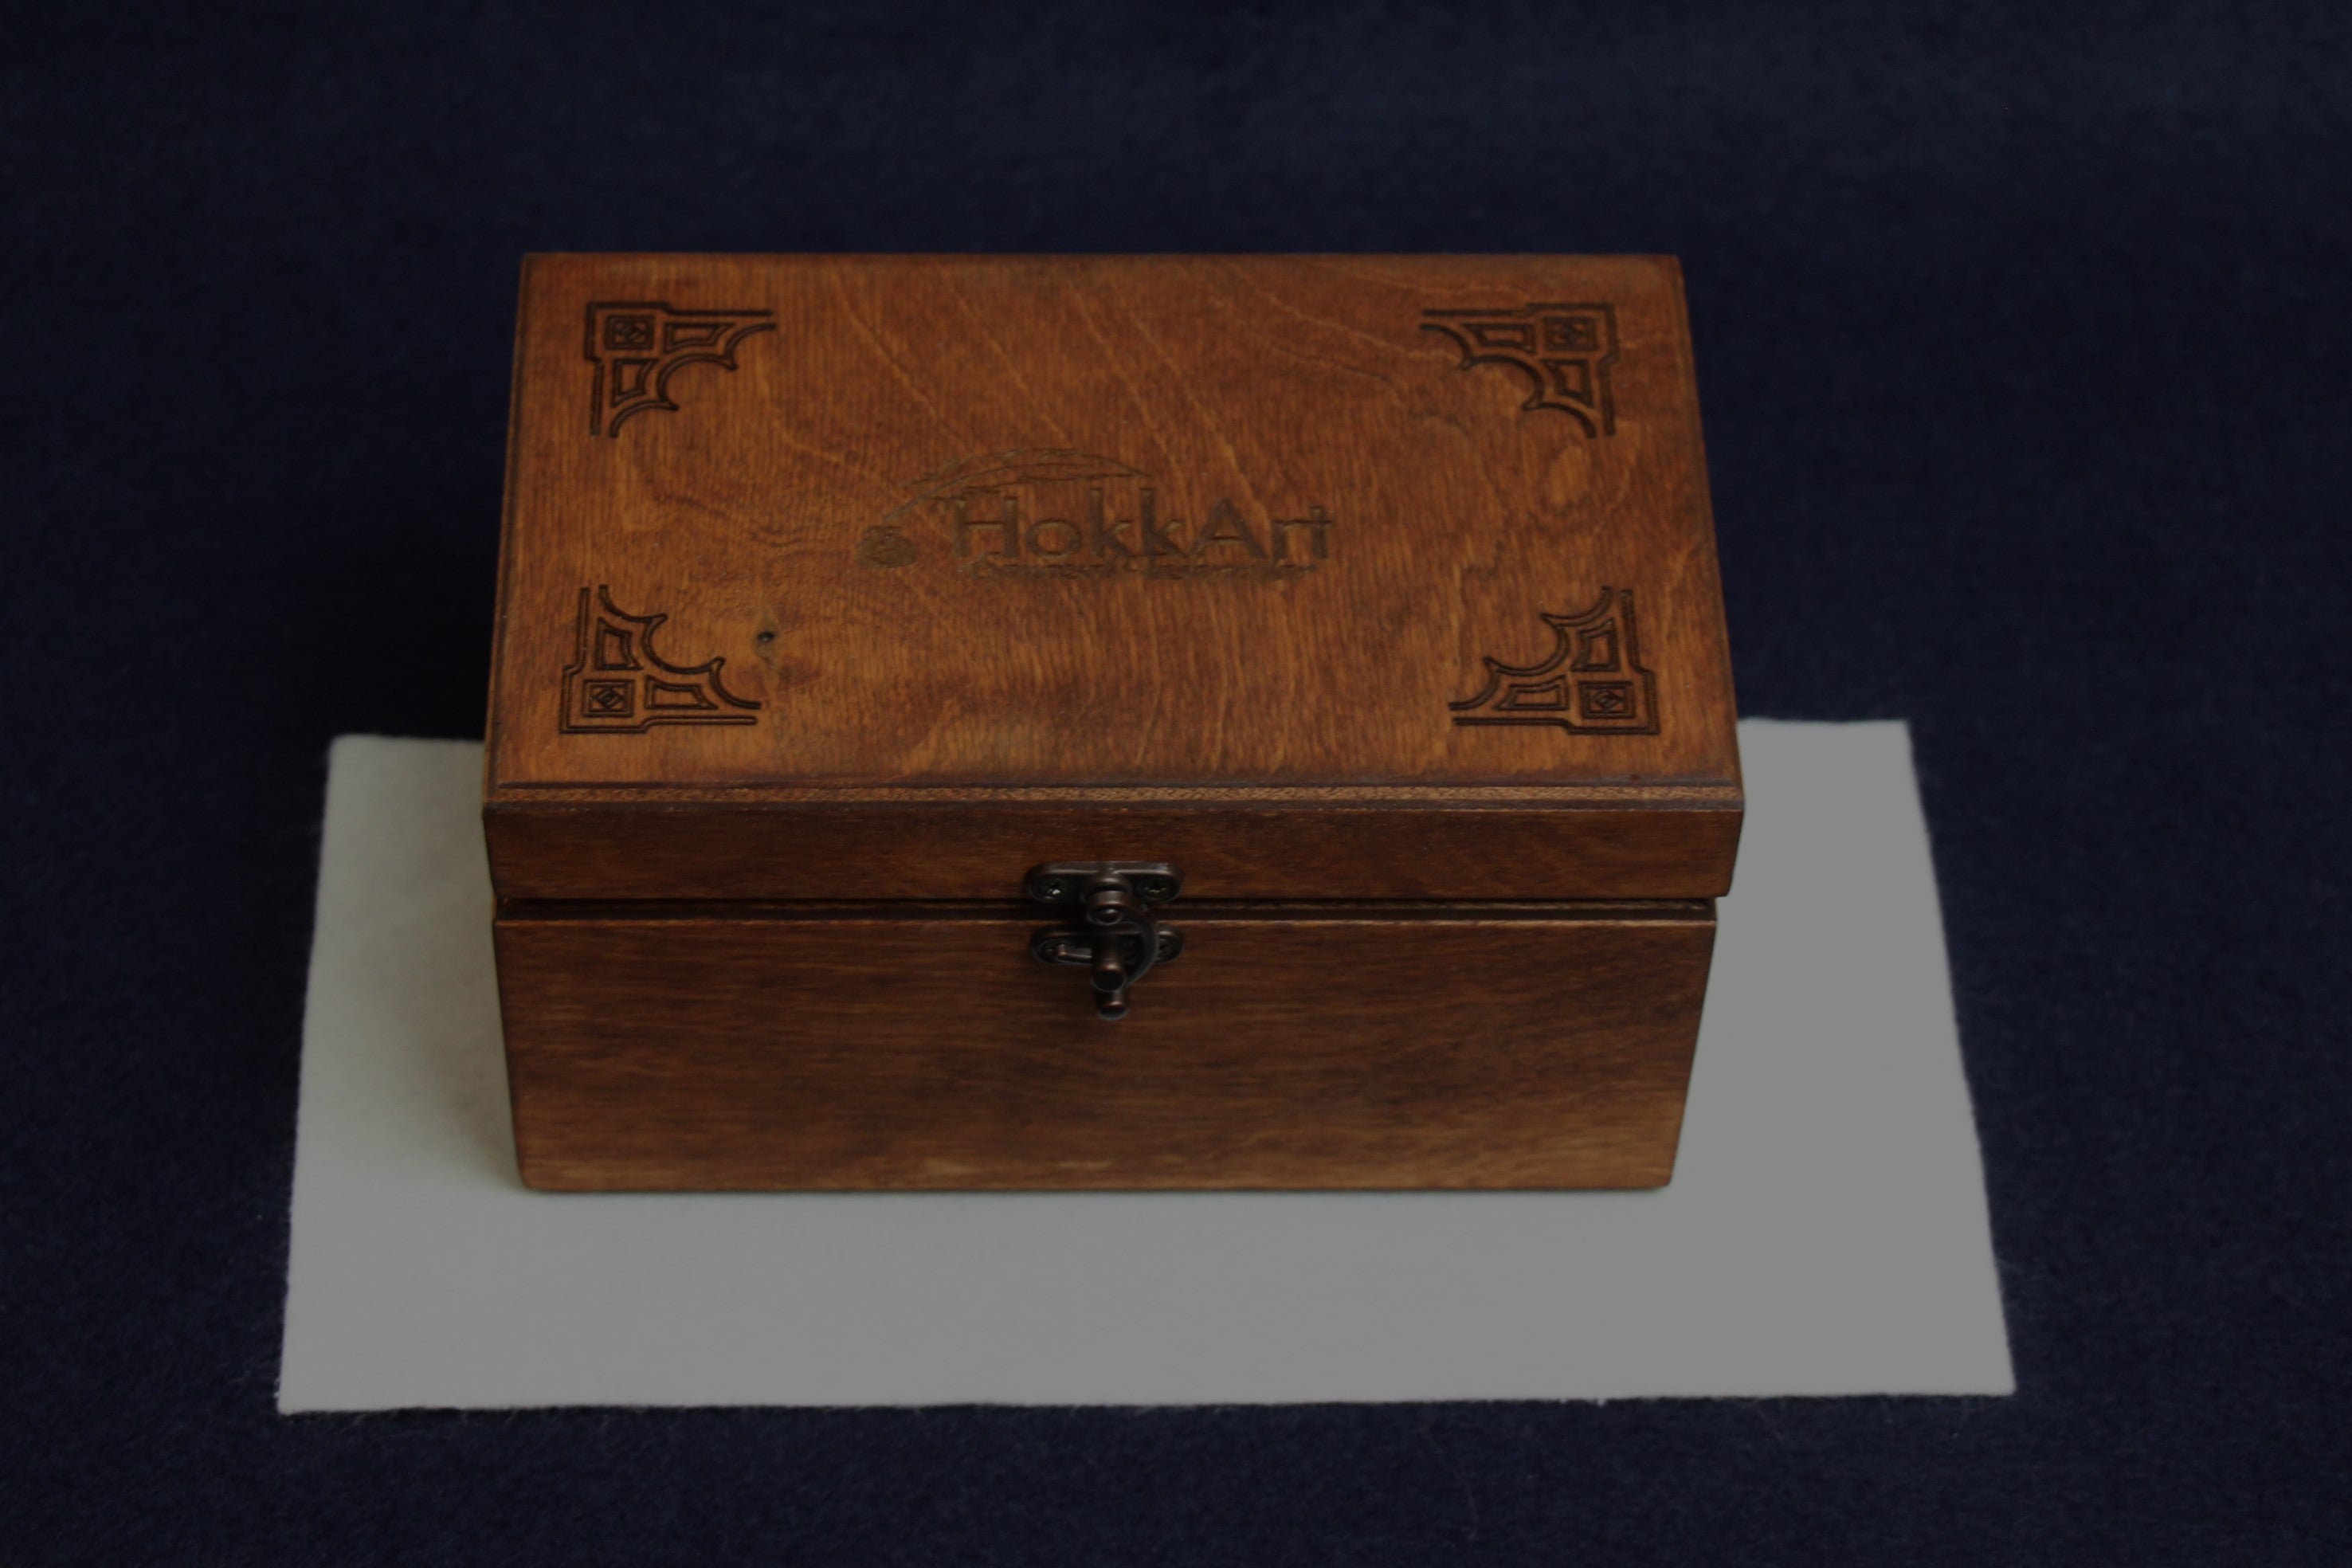 Beautiful hand-turned inkwell in wooden box - latte with cream streaks